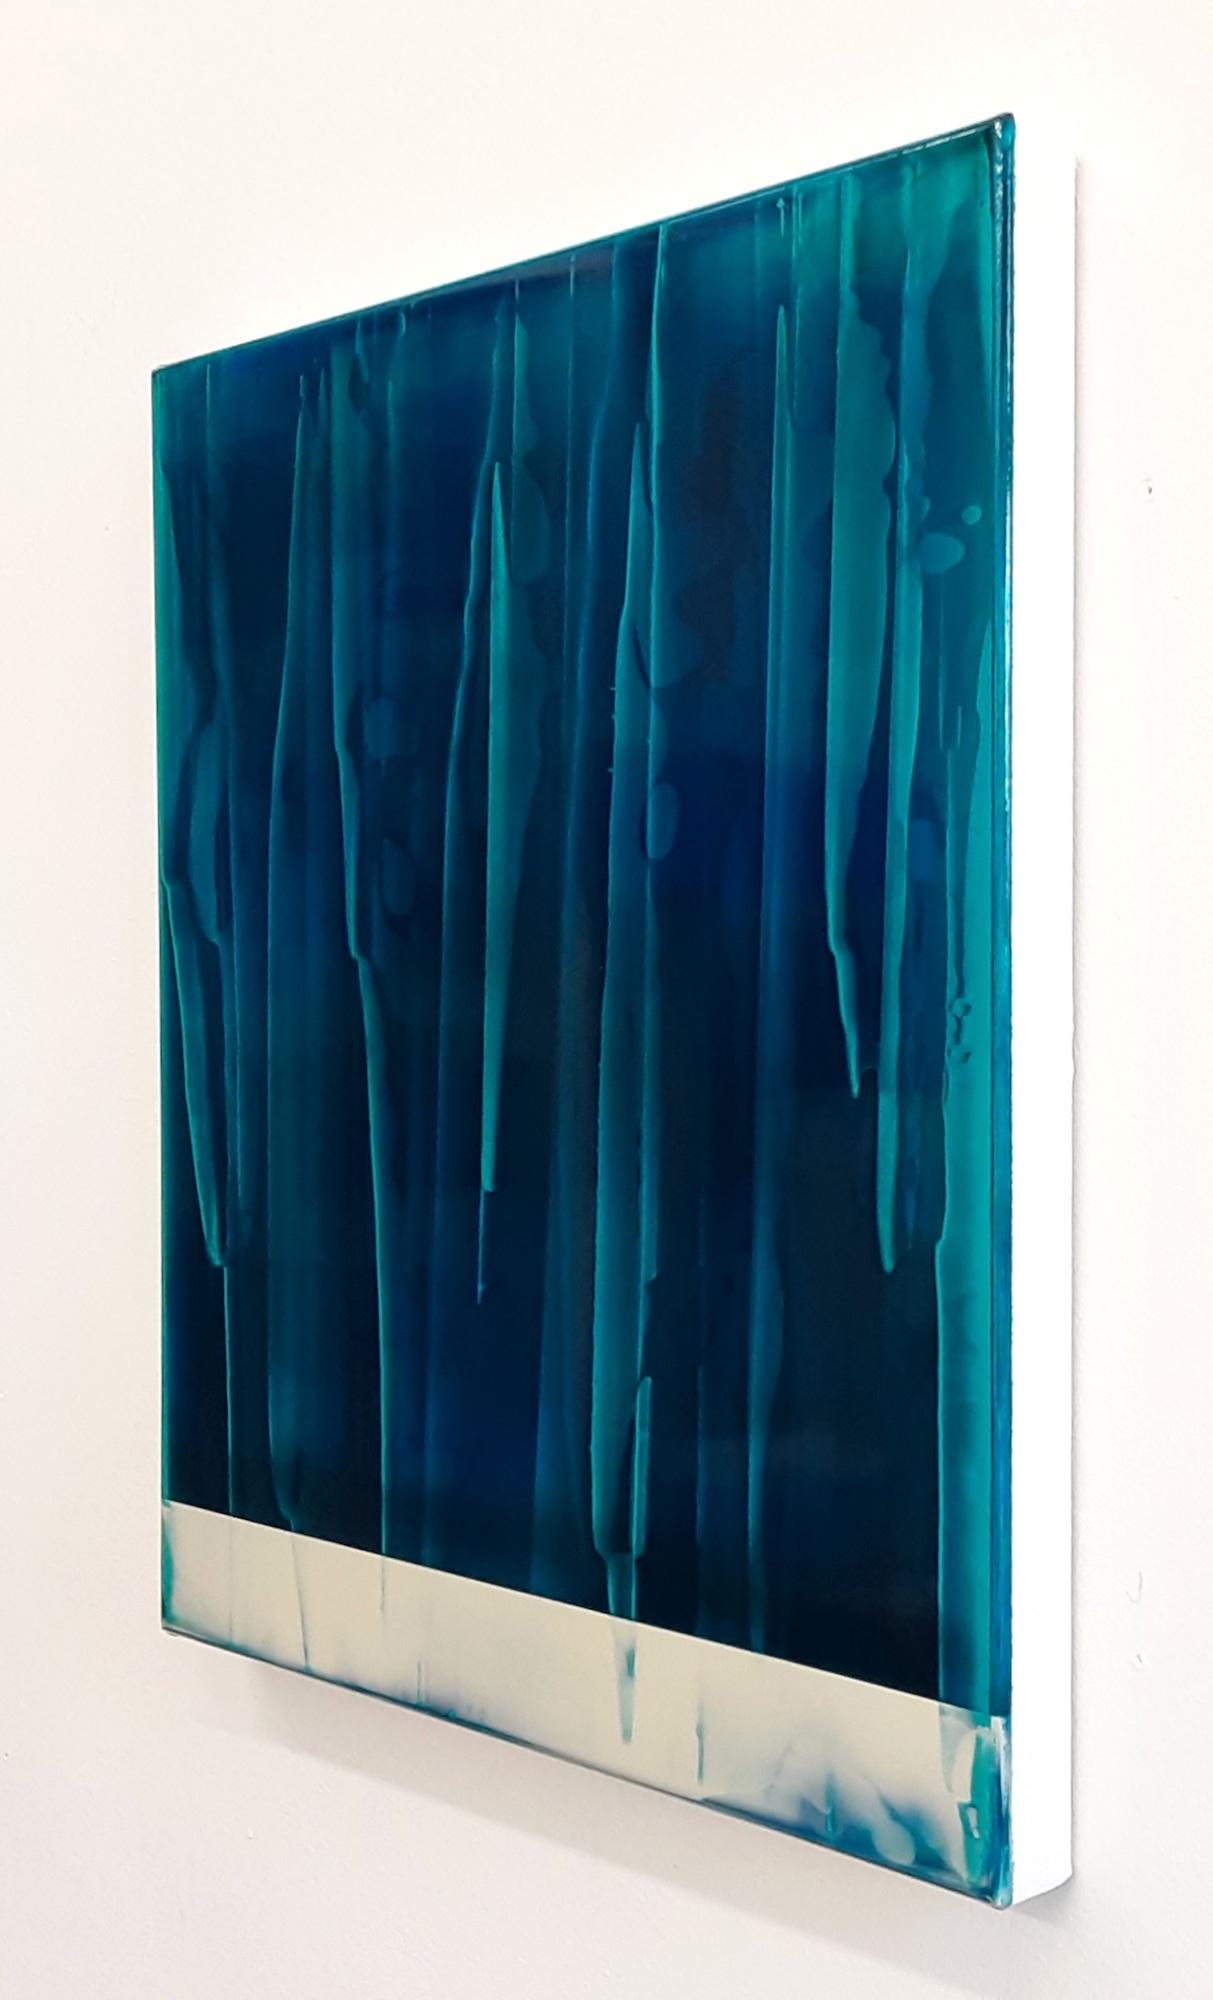 Echoes (1/19) by James Lumsden - Abstract colour painting, blue tones, gloss For Sale 3